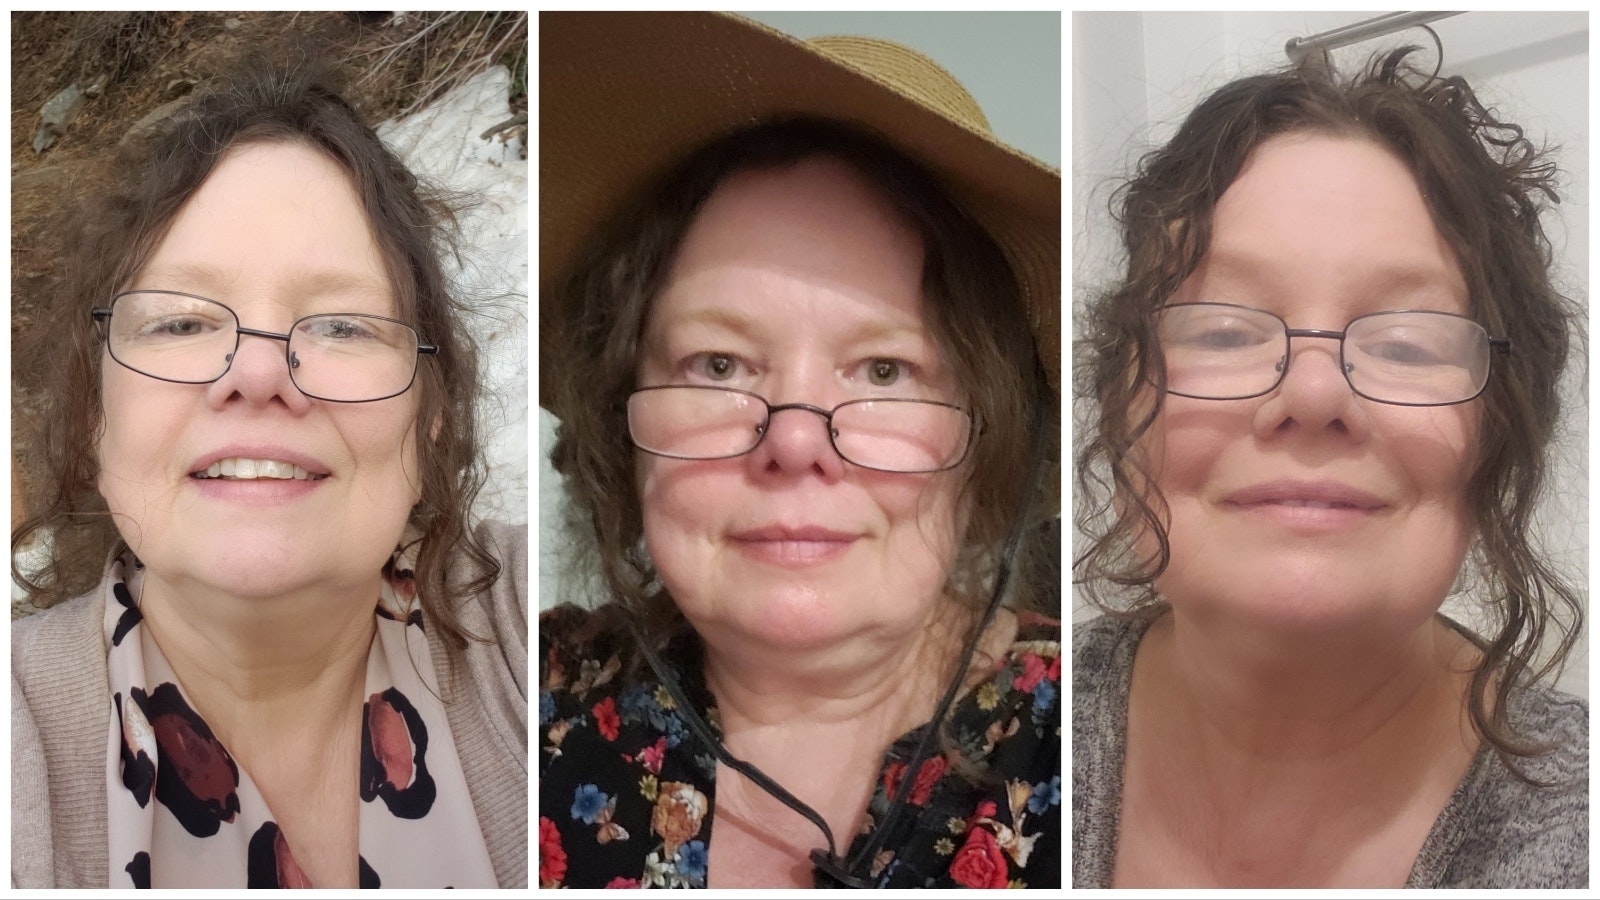 Renee Jean has been all over Wyoming this spring and summer, including a hike up Casper Mountain, left; sporting a new hat for Cheyenne Frontier Days, center; and tired in a selfie at one4 of dozens of hotels. "I don't remember where, just was happy to be done with driving."